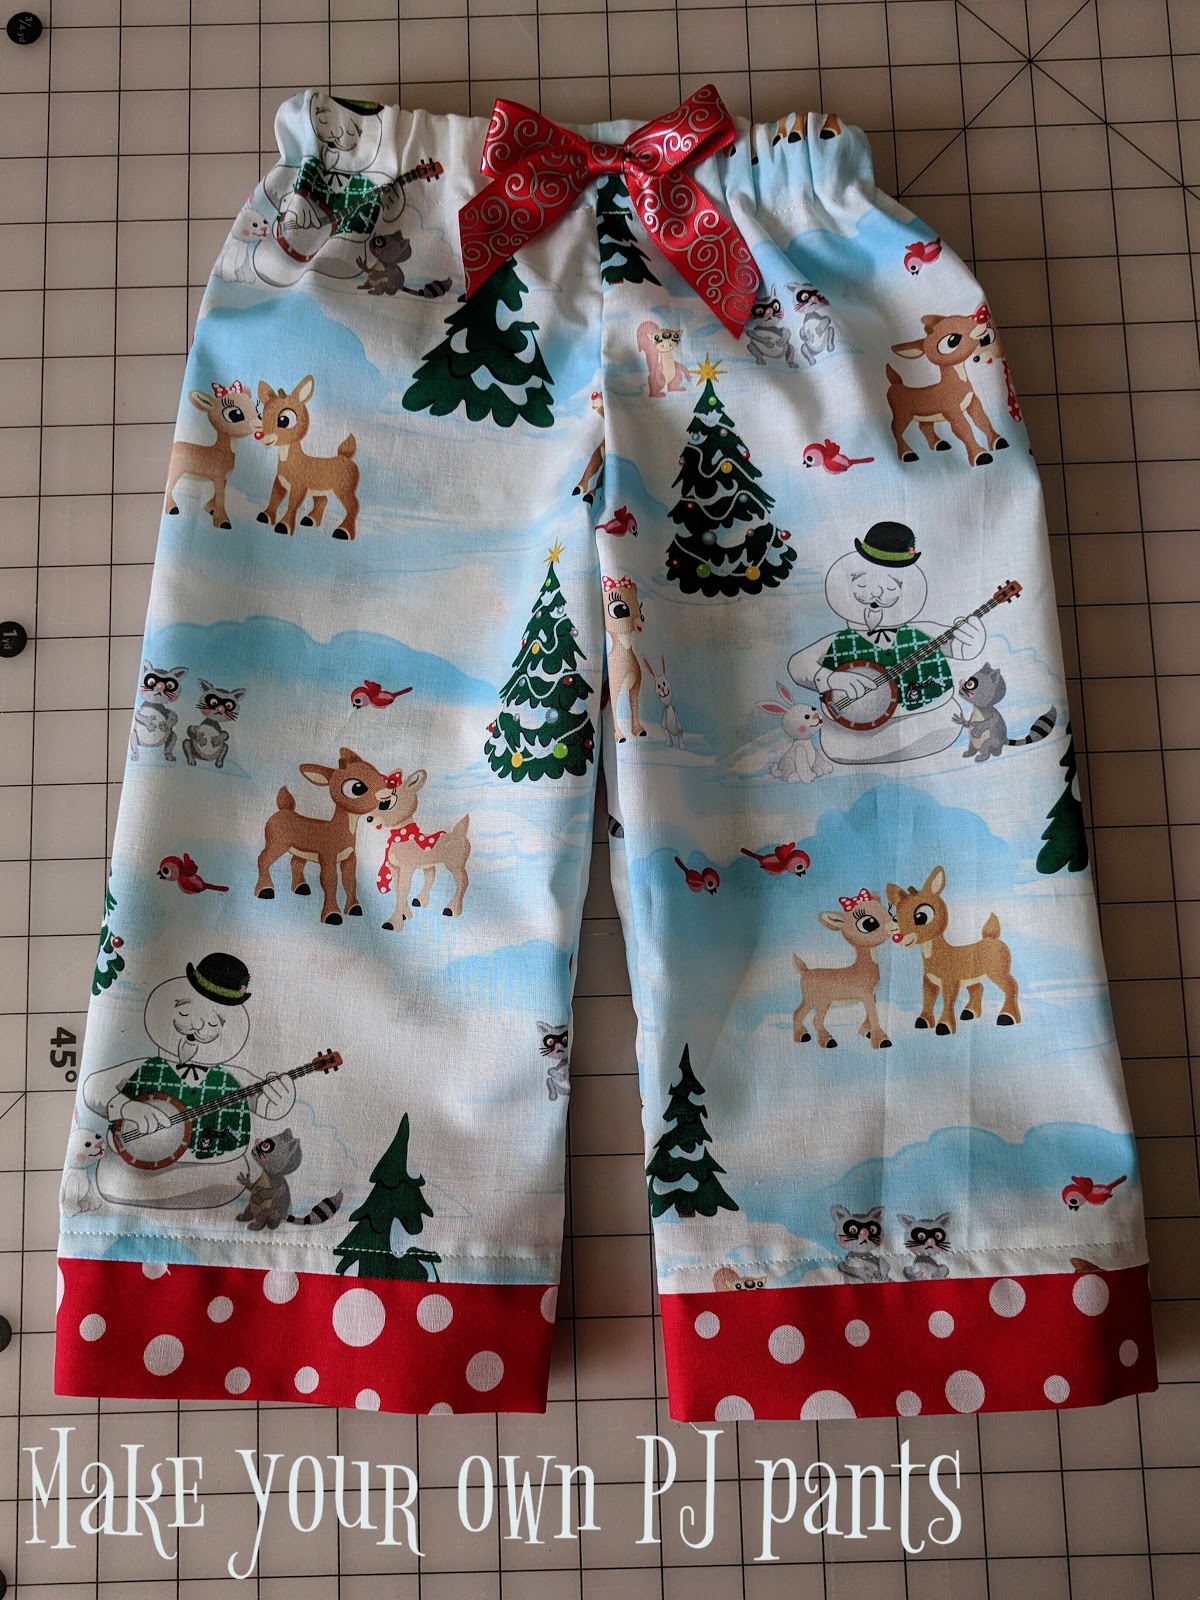 Wild Child at Home: Making PJ Pants With Cuffs